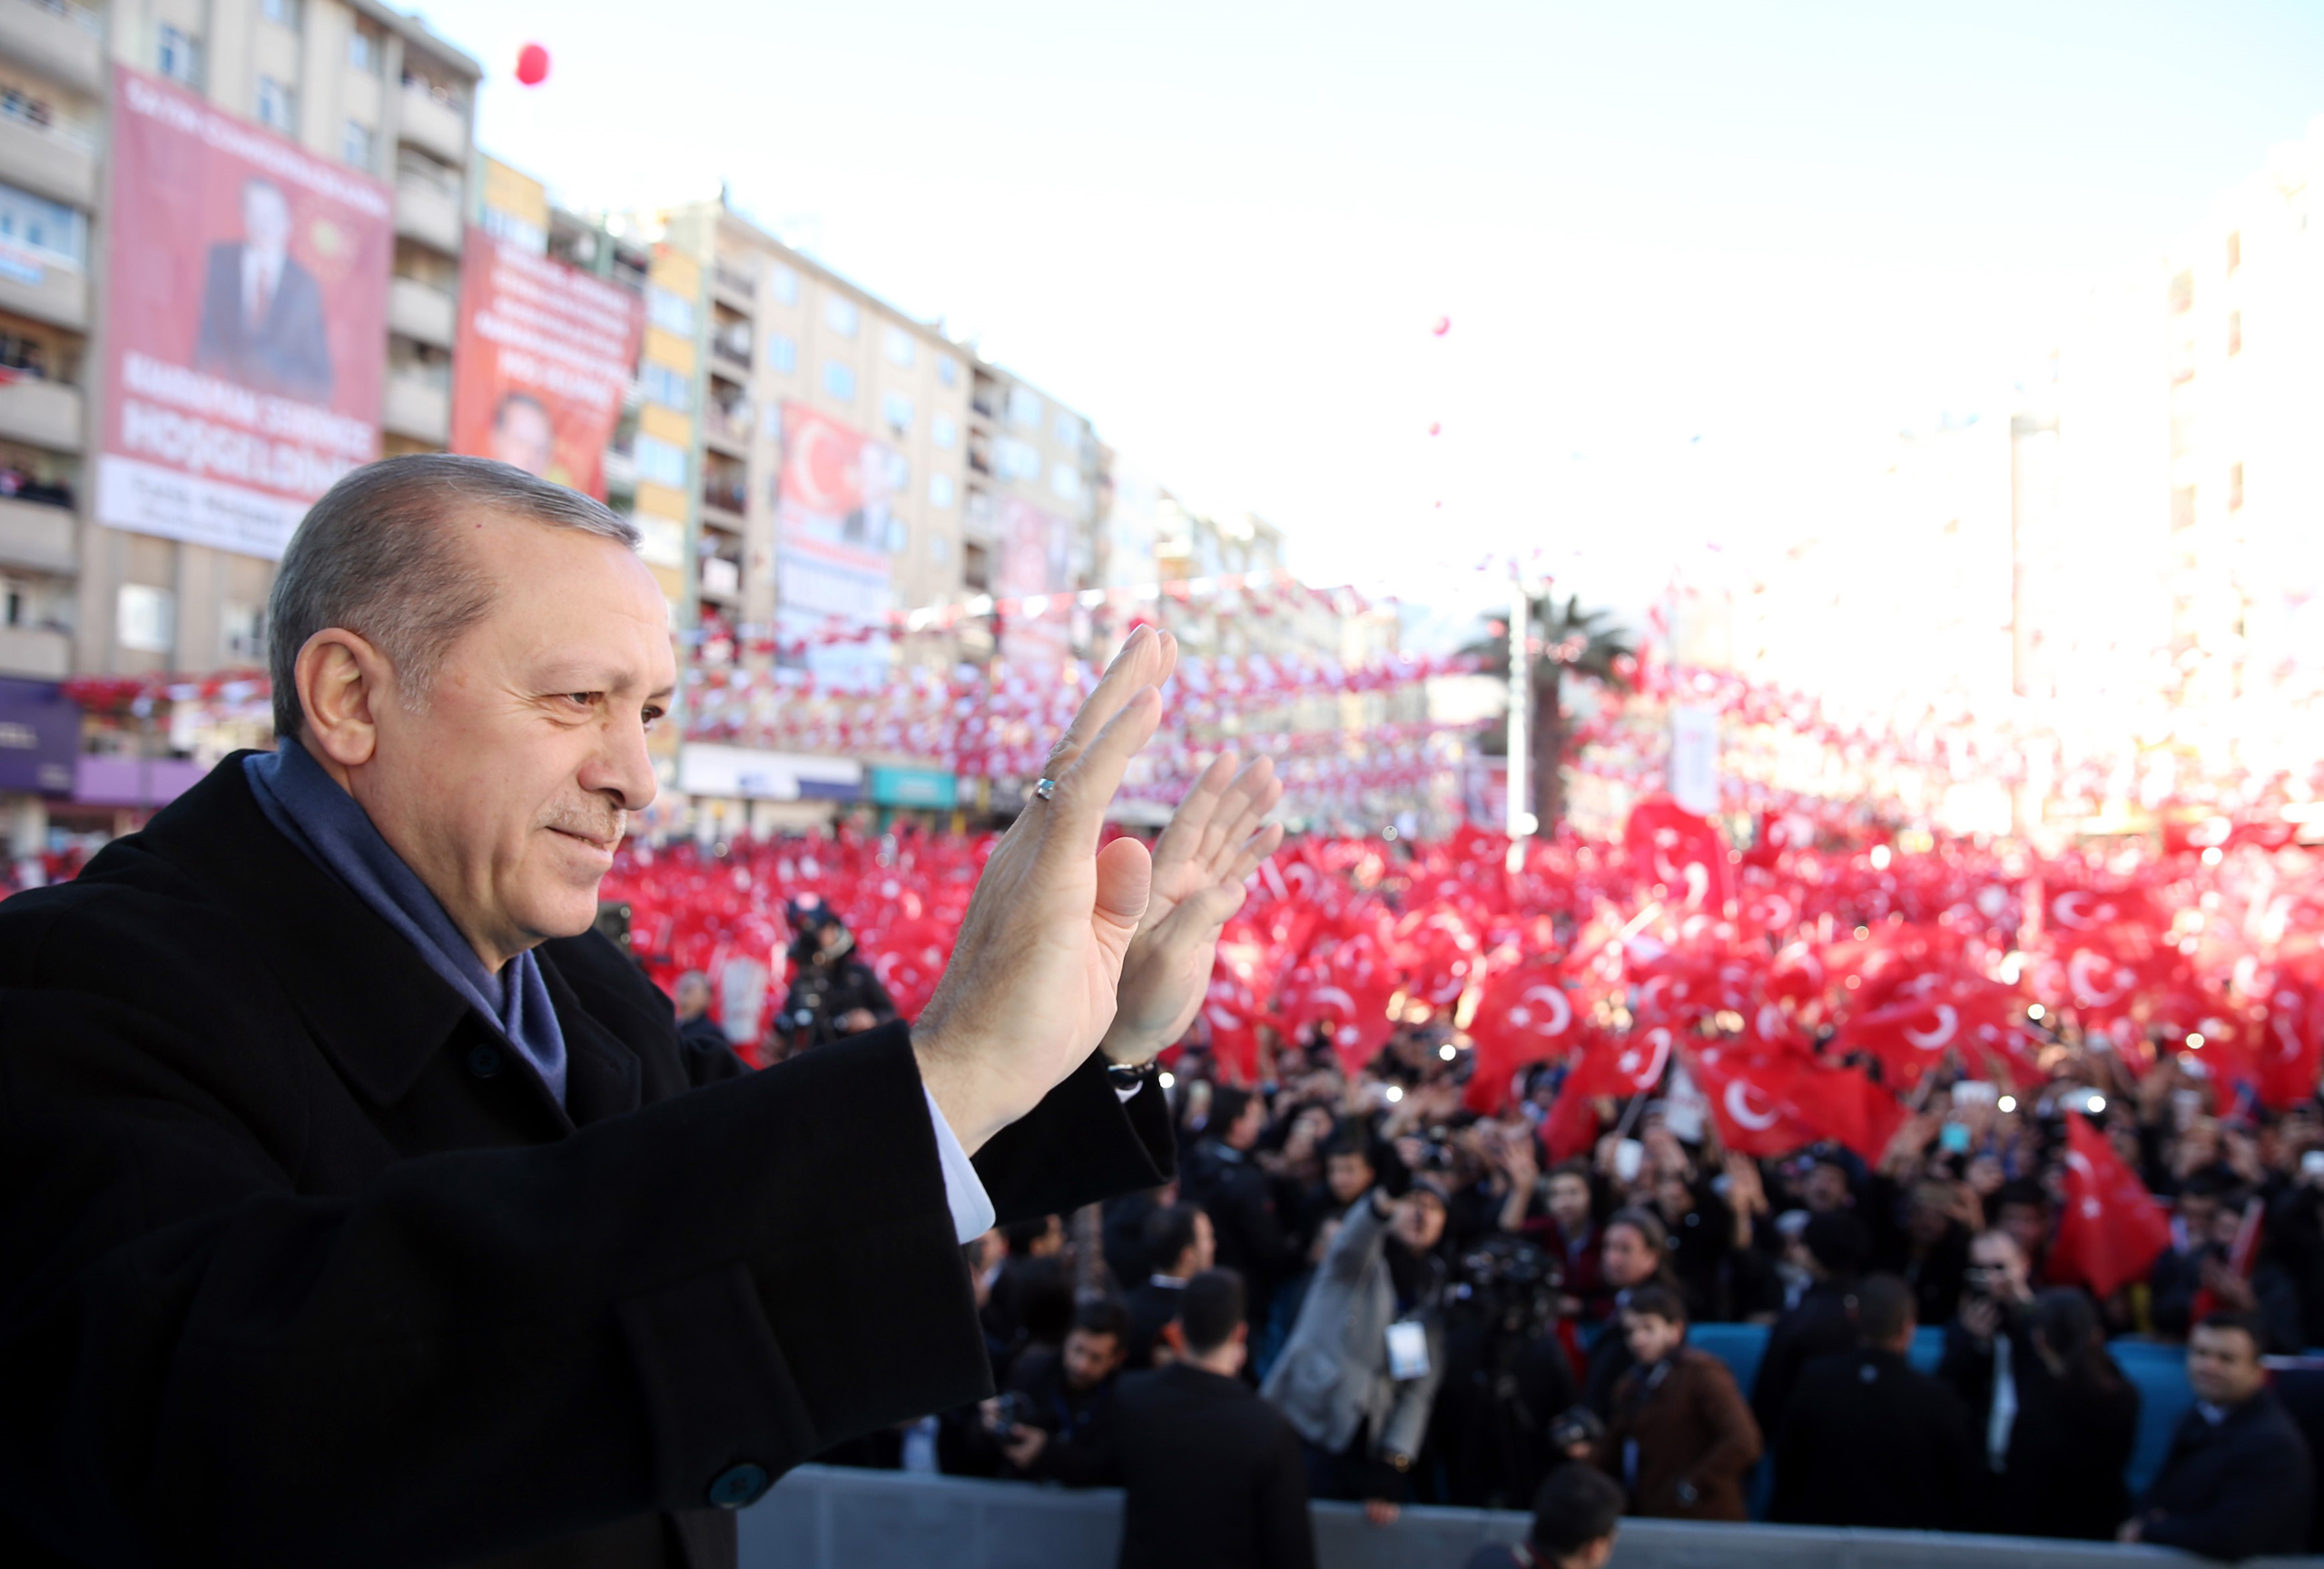 Turkish President Recep Tayyip Erdogan during an opening ceremony at Muftuluk Square in Kahramanmaras, Turkey, on Feb. 17, 2017. (Yasin Bulbul—Anadolu Agency/Getty Images)